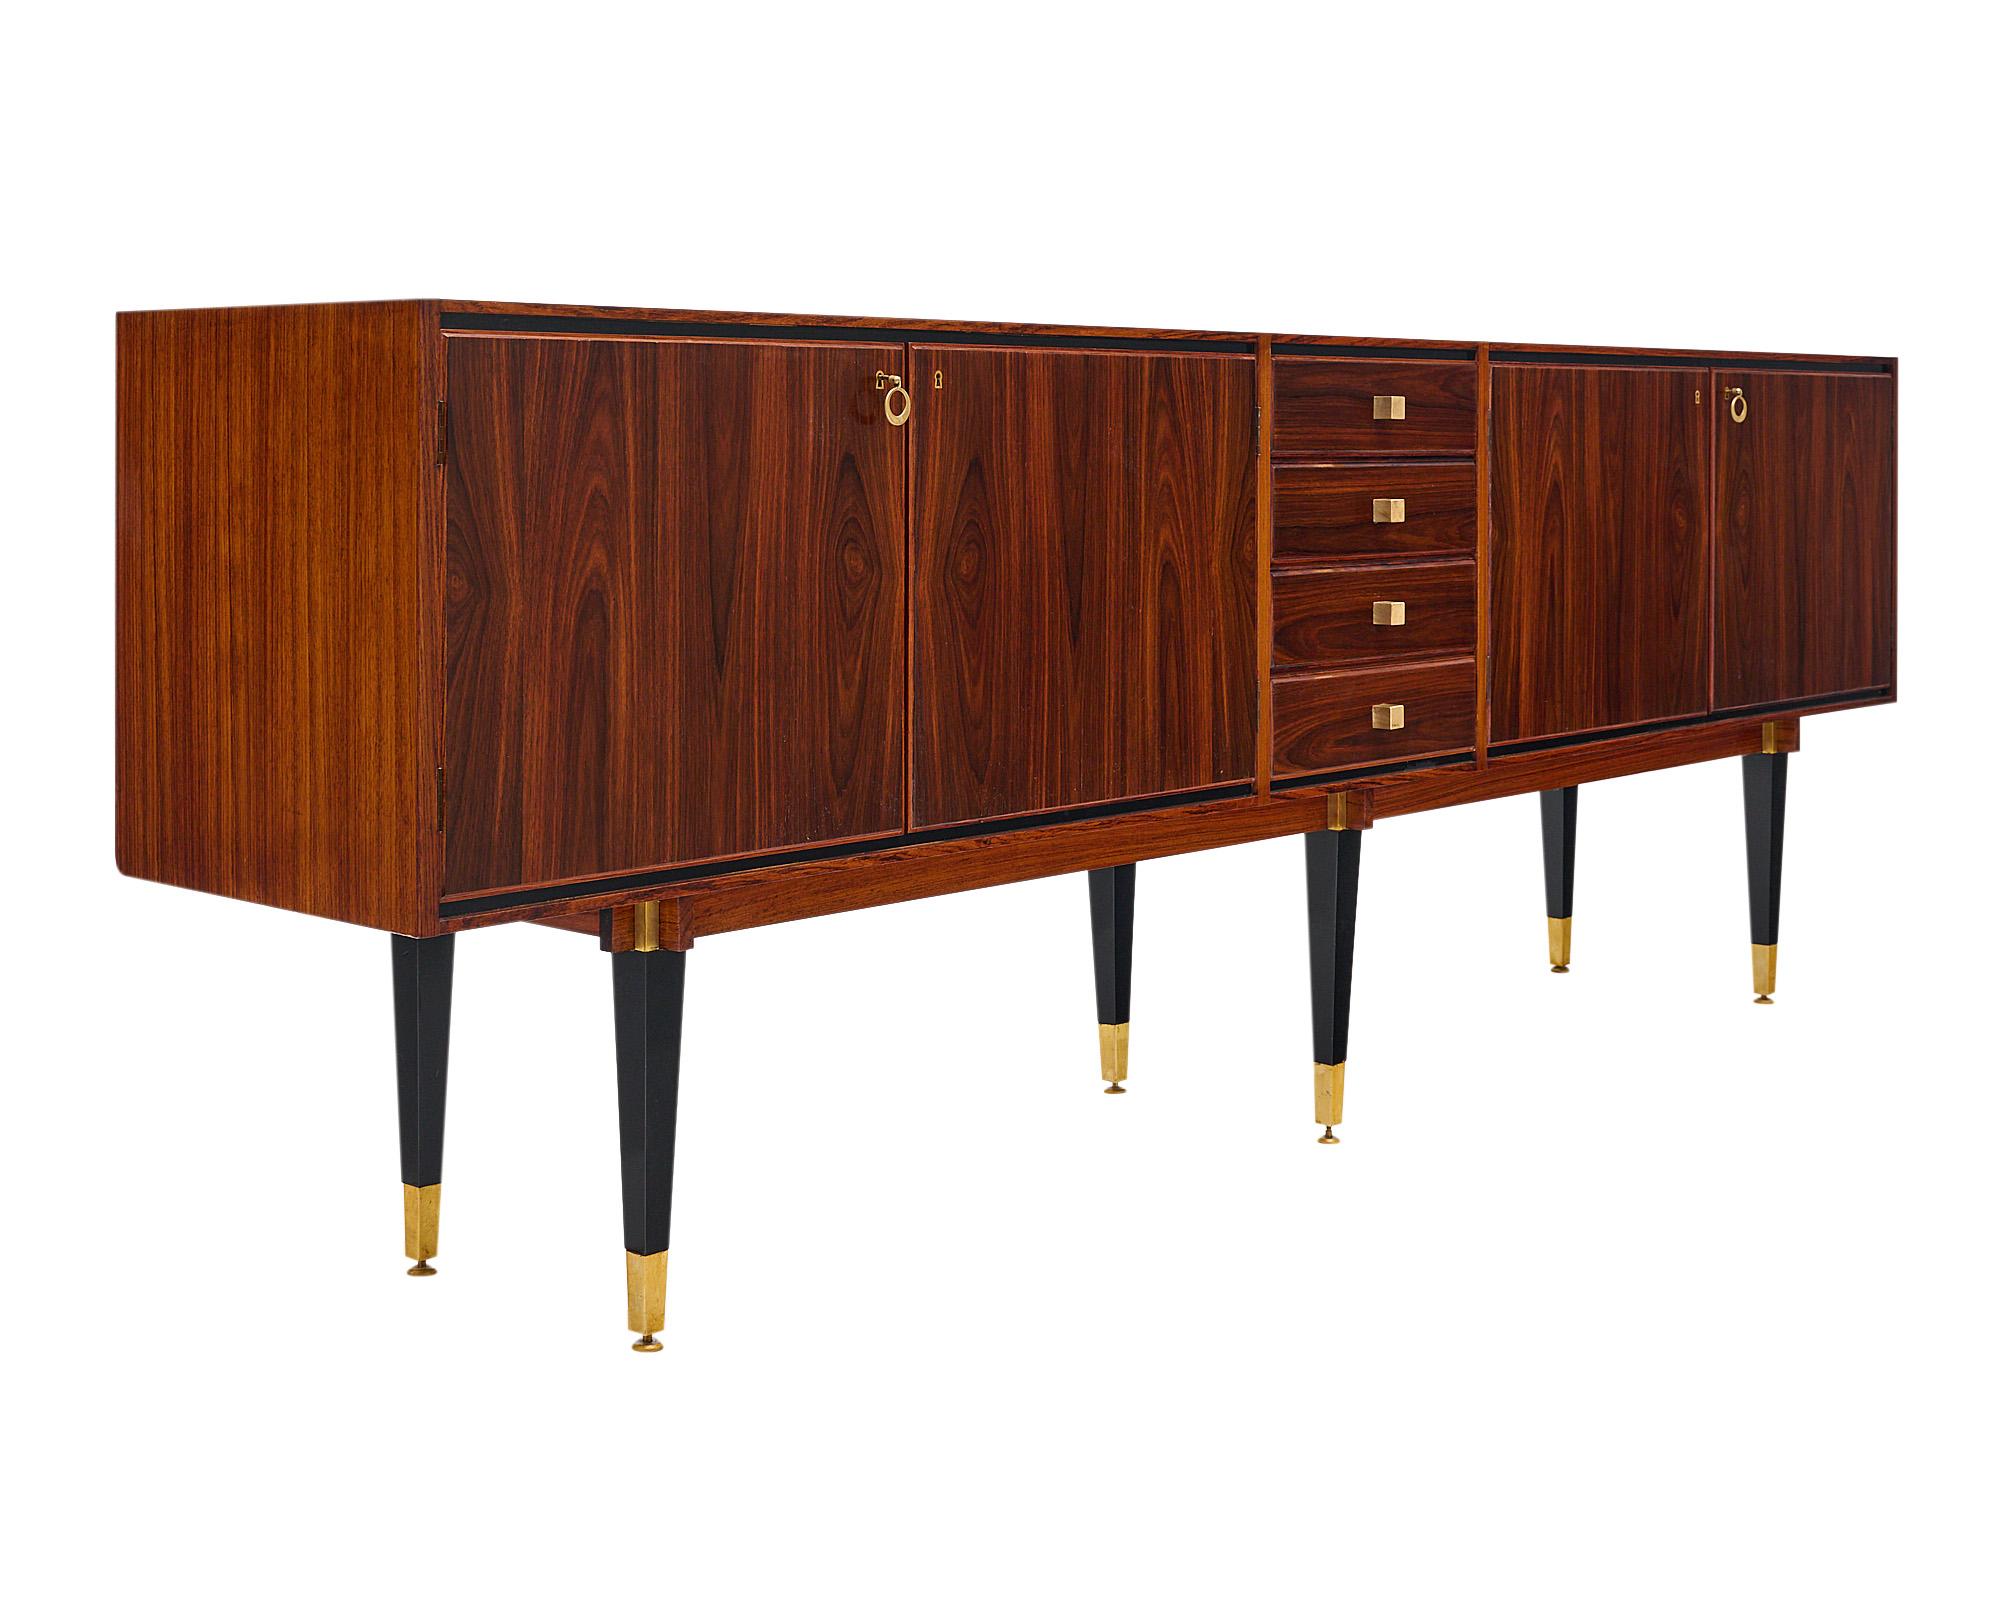 Buffet/Credenza, Italian Mid-Century Modern, made of figured Brazilian rosewood. This finely crafted enfilade features two sets of double doors with original working locks and keys, opening to adjustable shelves. The cabinets are separated by four